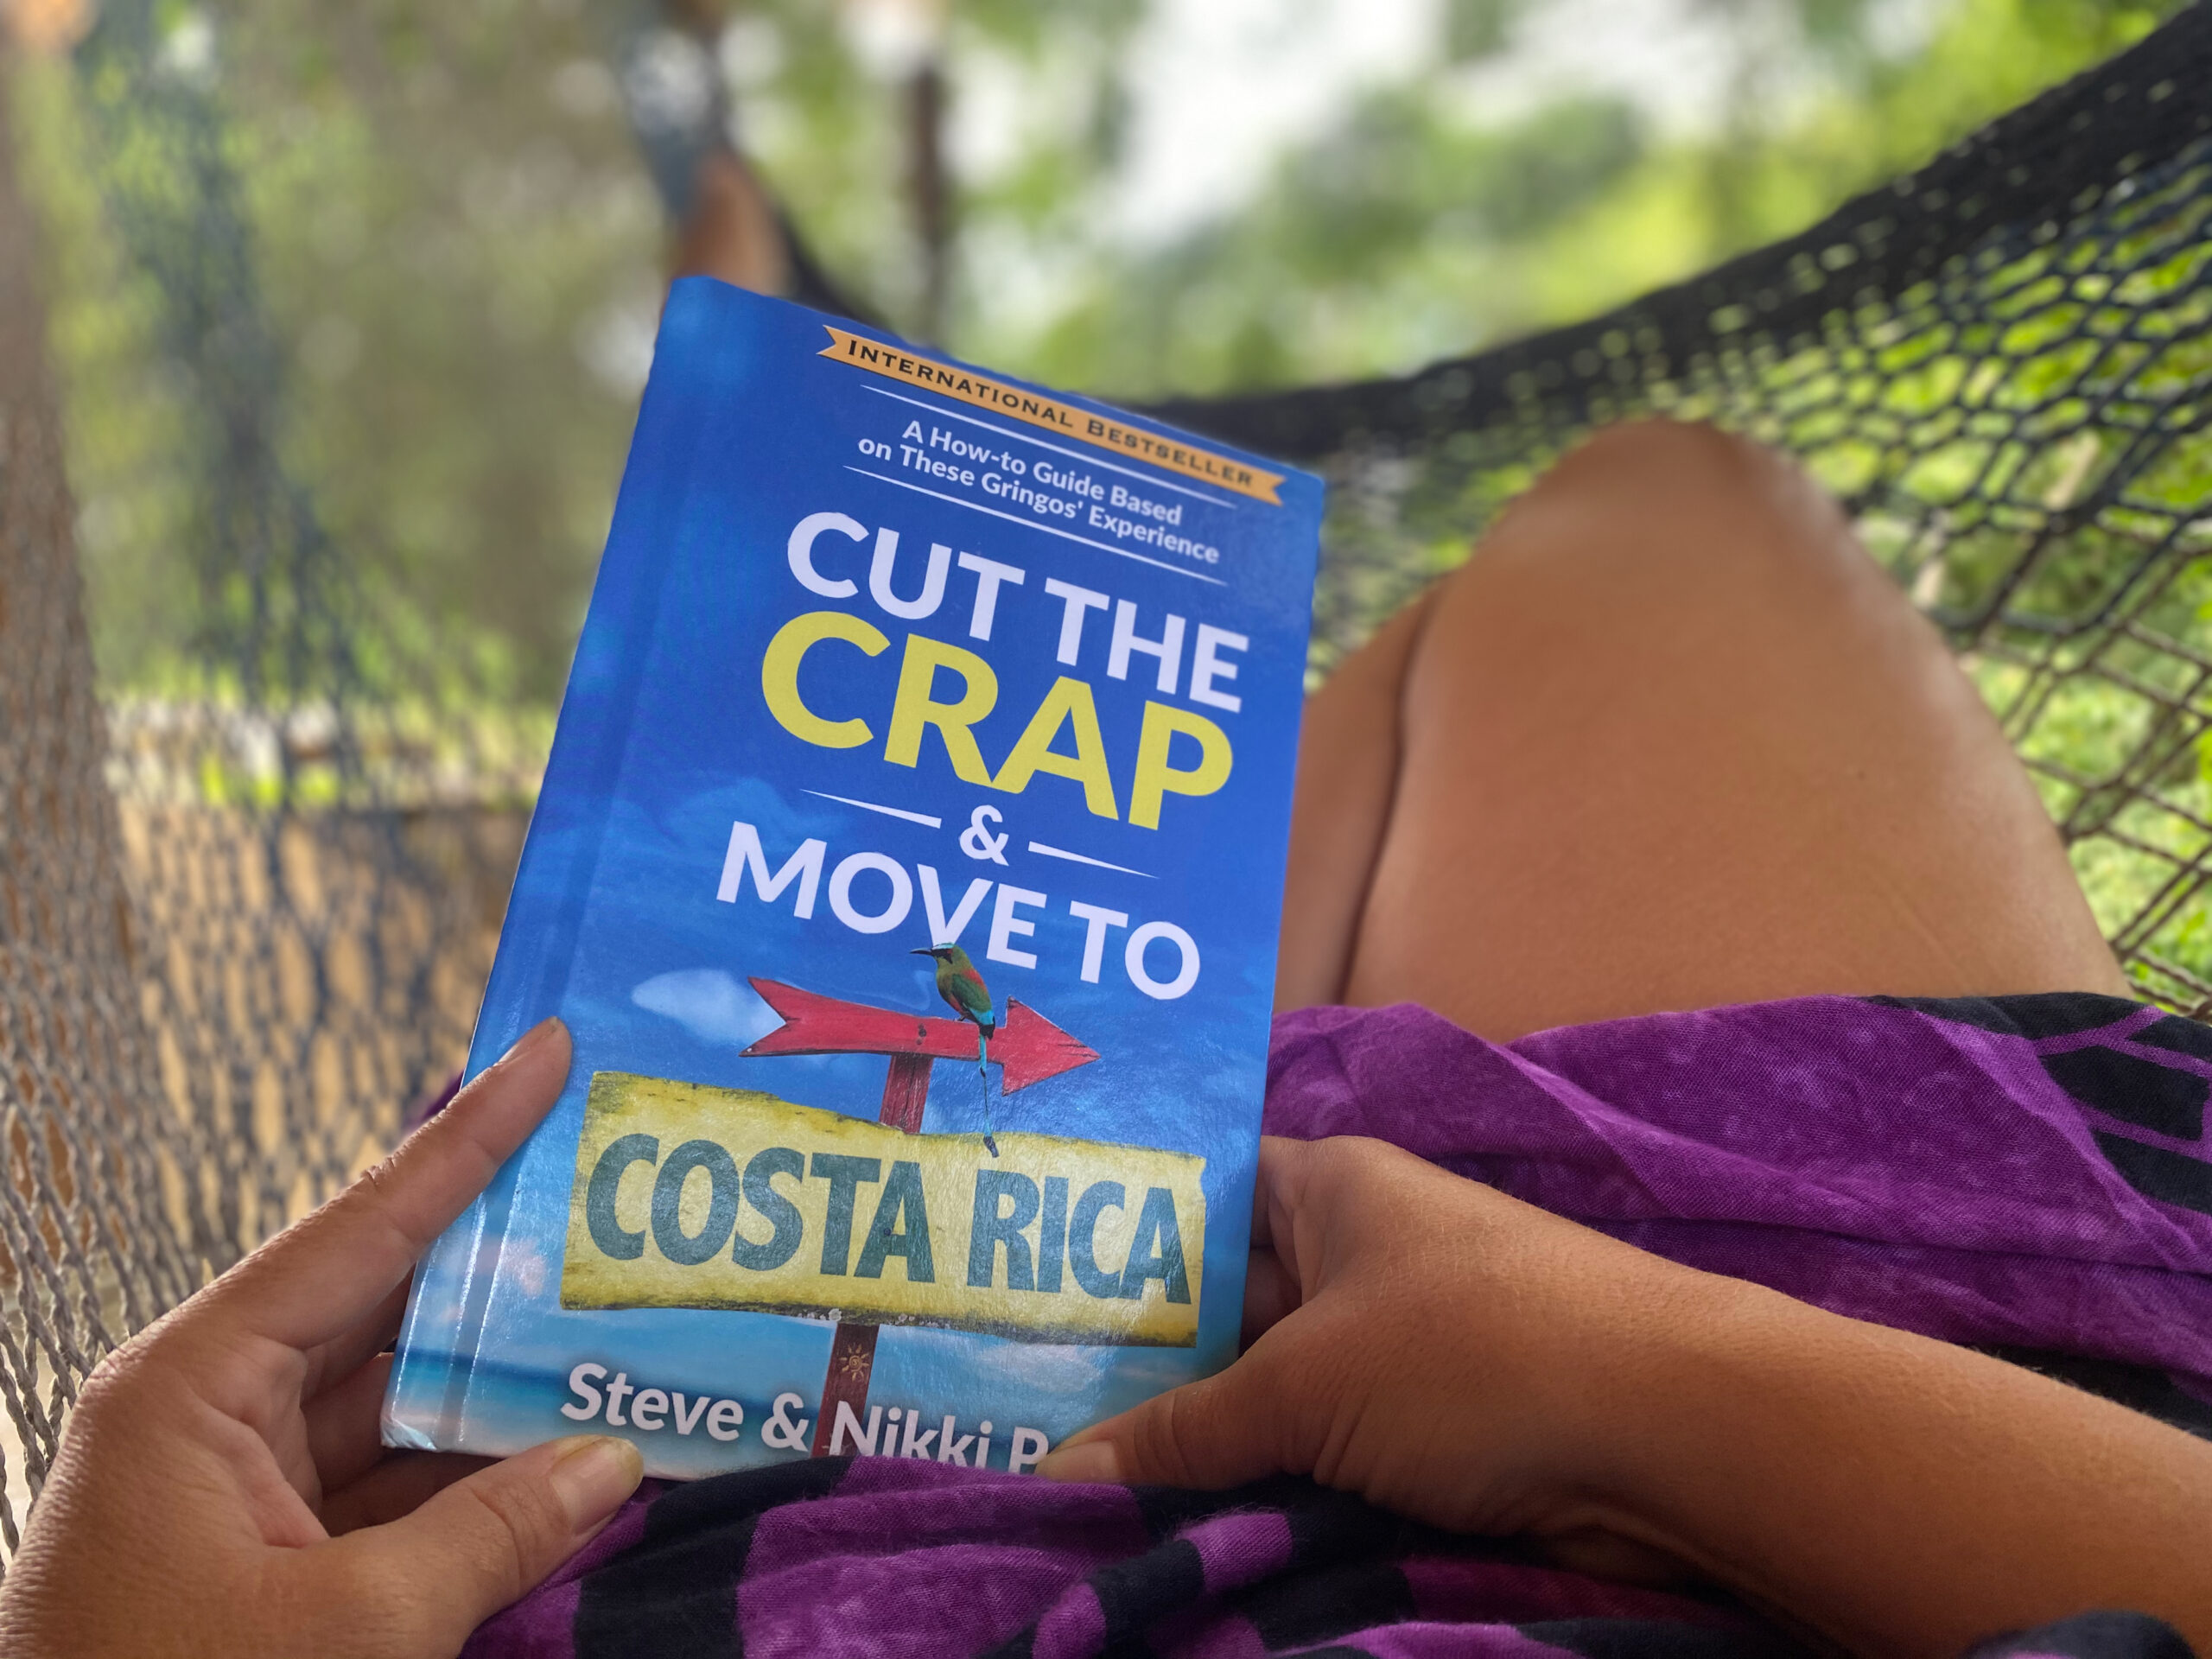 Cut the Crap & Move to Costa Rica Hardcover book being held in a hammock